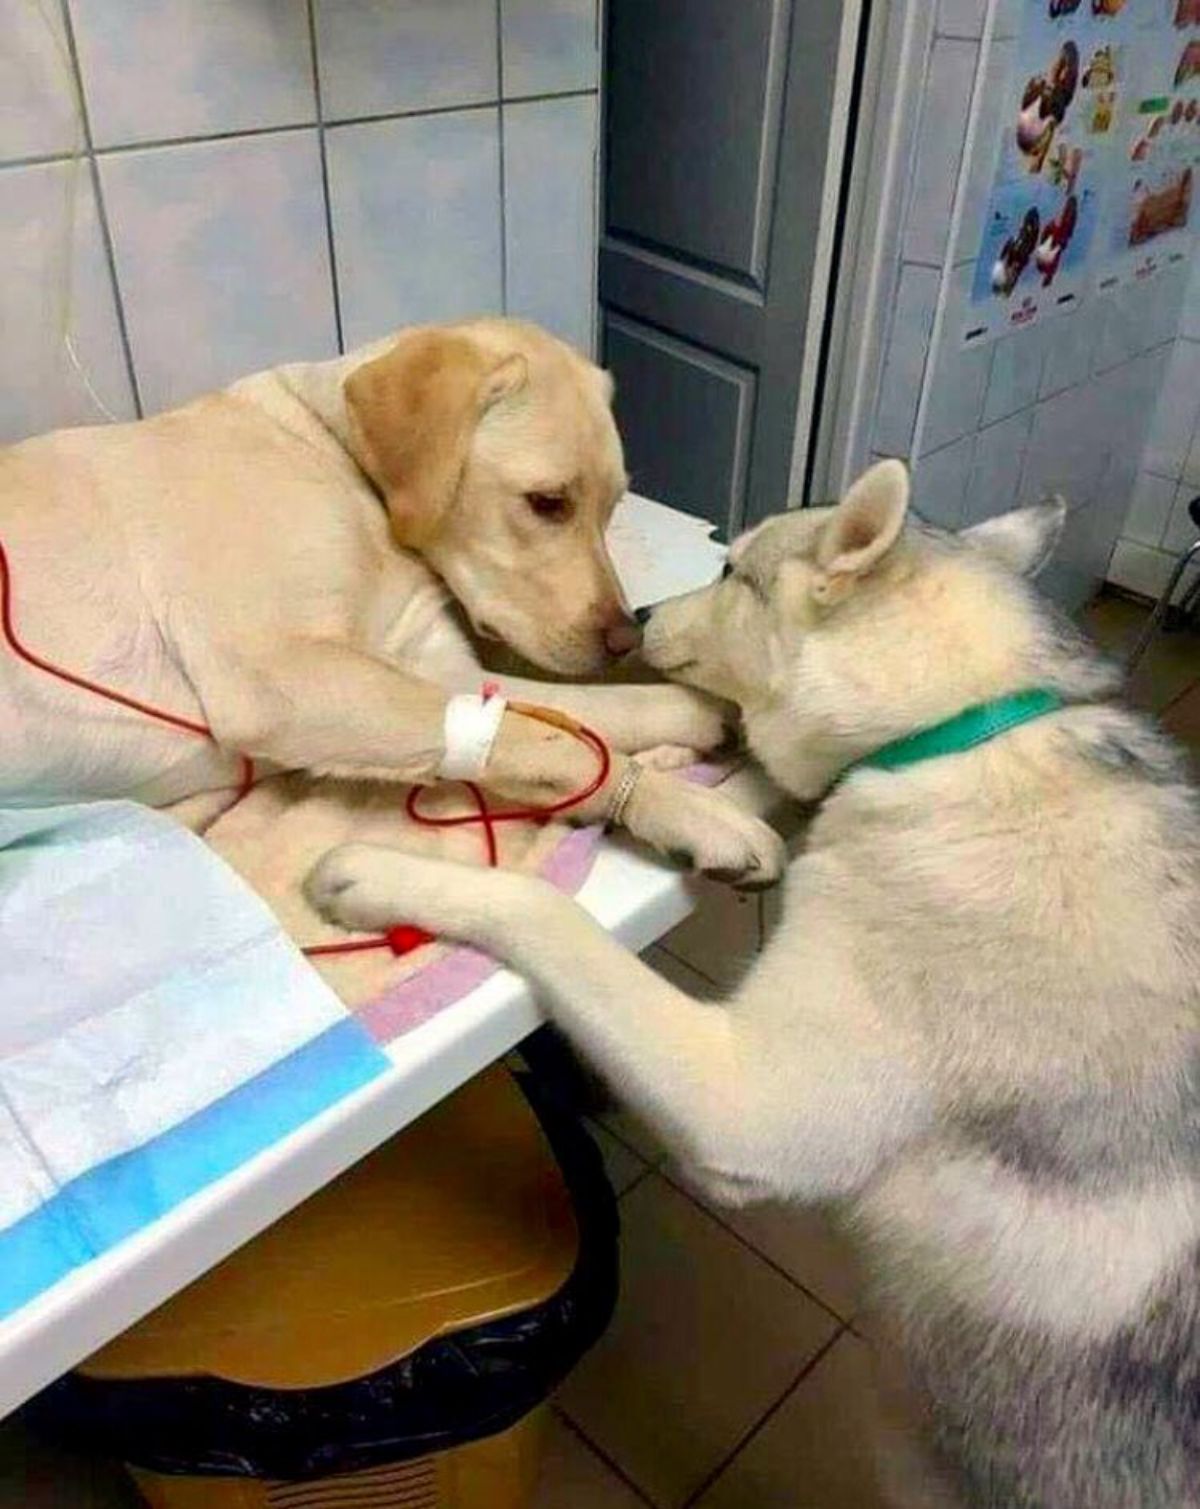 black and brown husky or malamute reaching up from the floor to yellow labrador retriever laying on hospital bed with IV injected